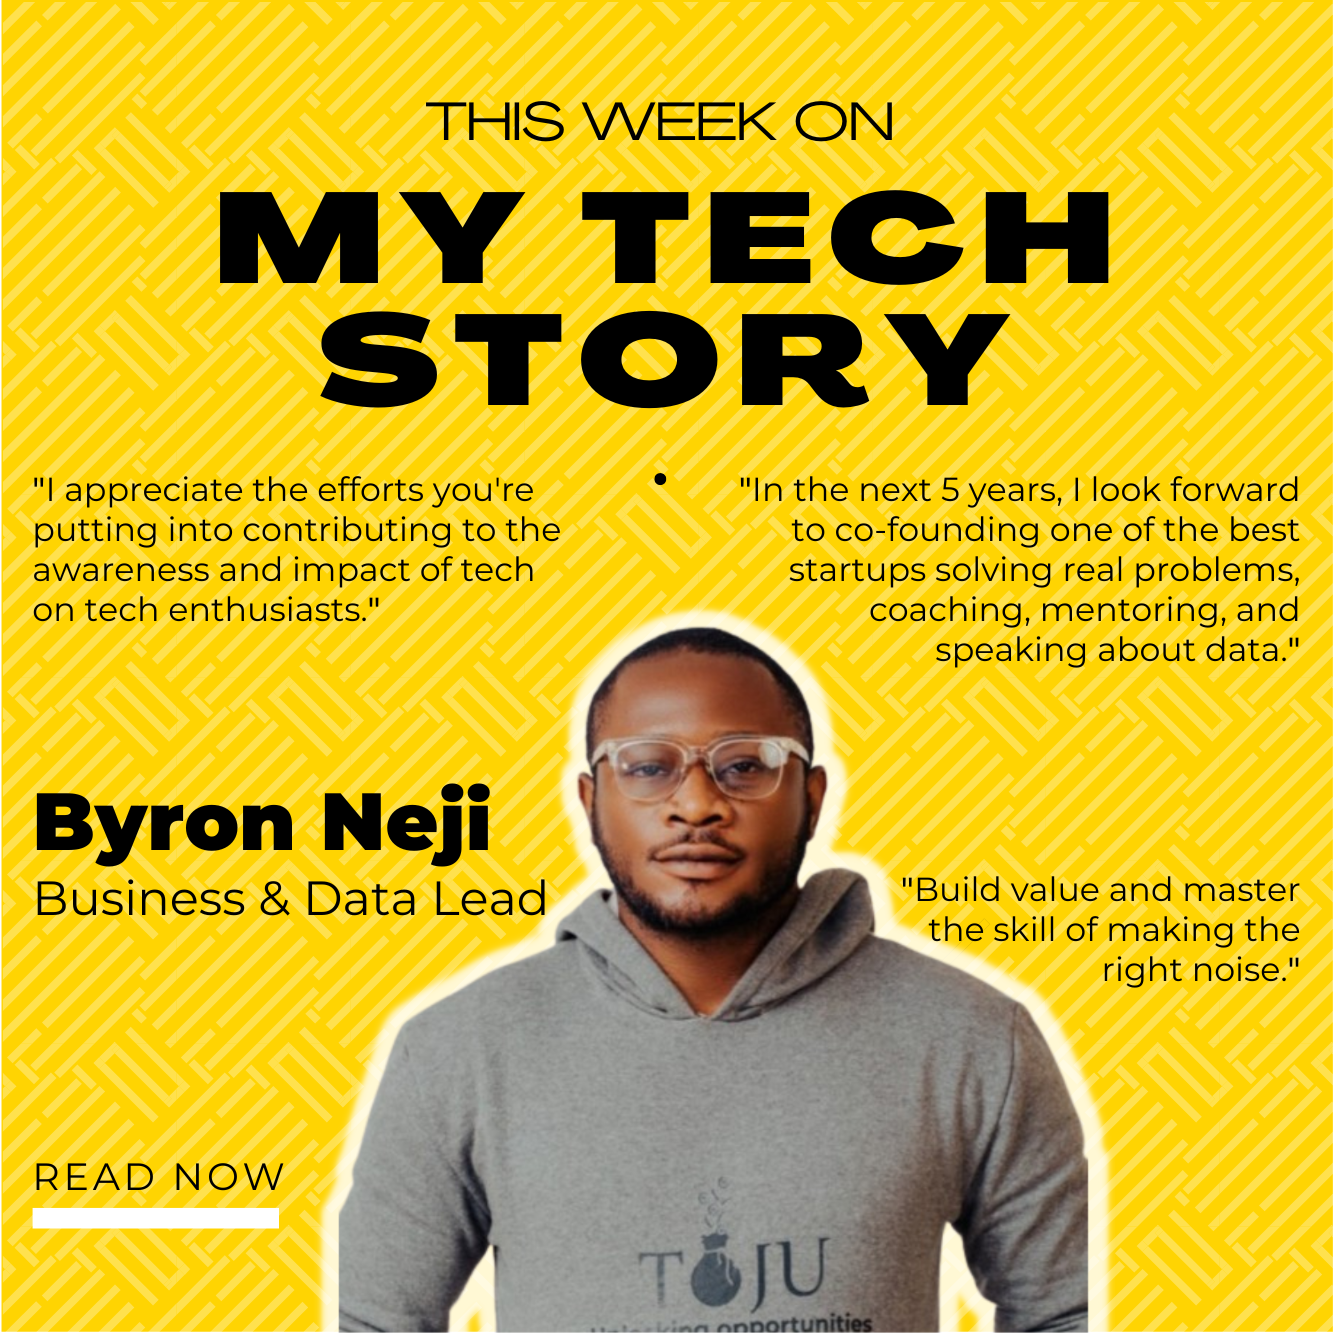 MyTechStory: Meet Byron, A Business and Data lead.